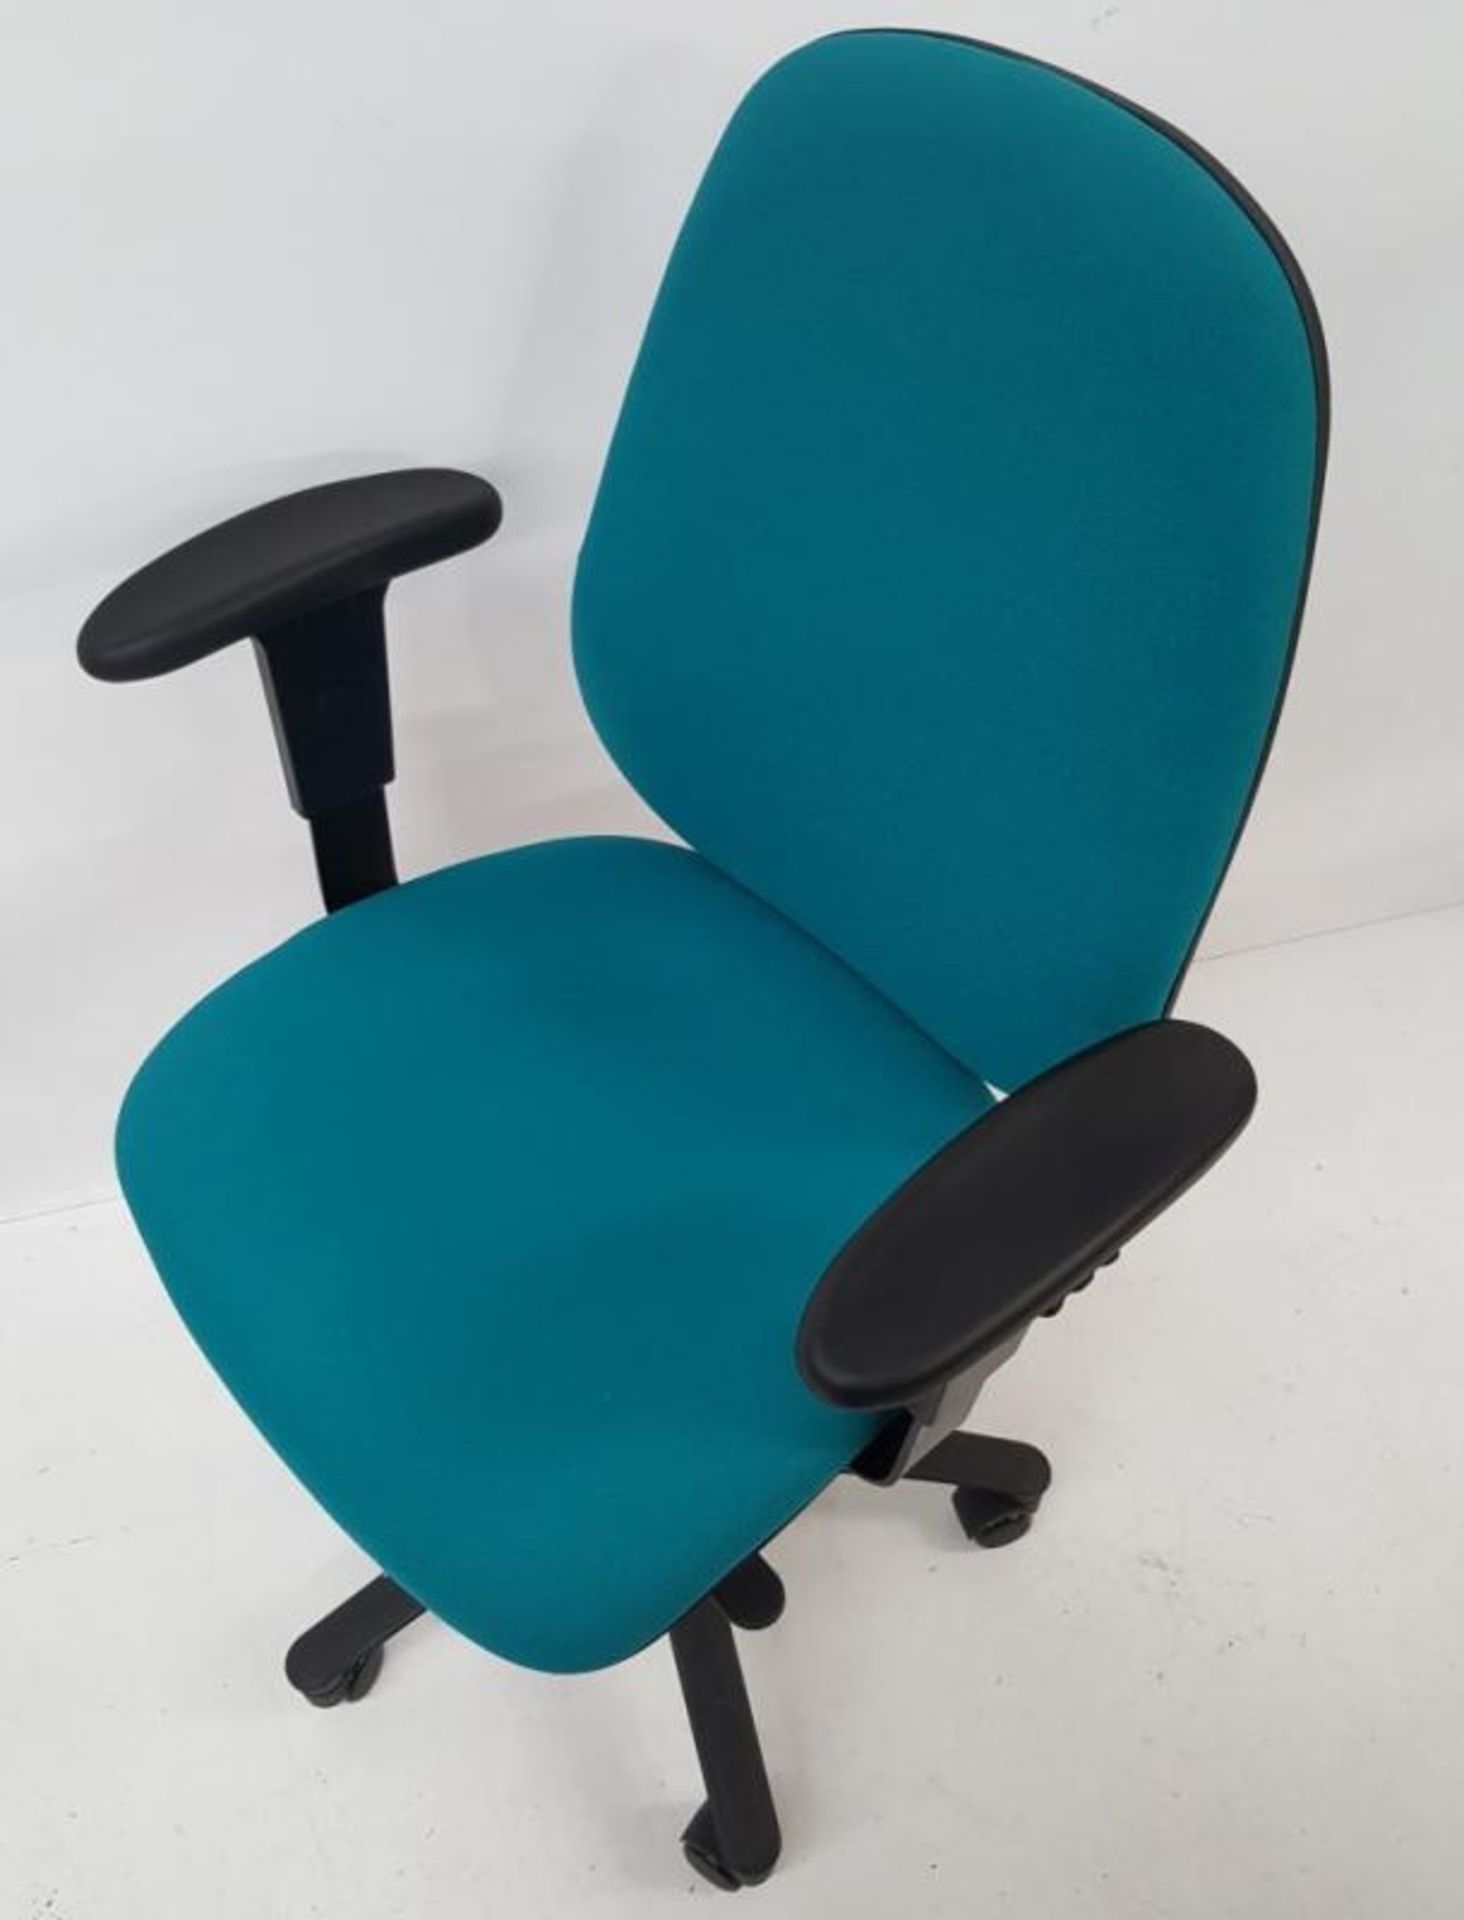 4 x OCEE Design ‘TICK’ Premium High Back Office Chairs In Turquoise With Adjustable Height And Synch - Image 6 of 9